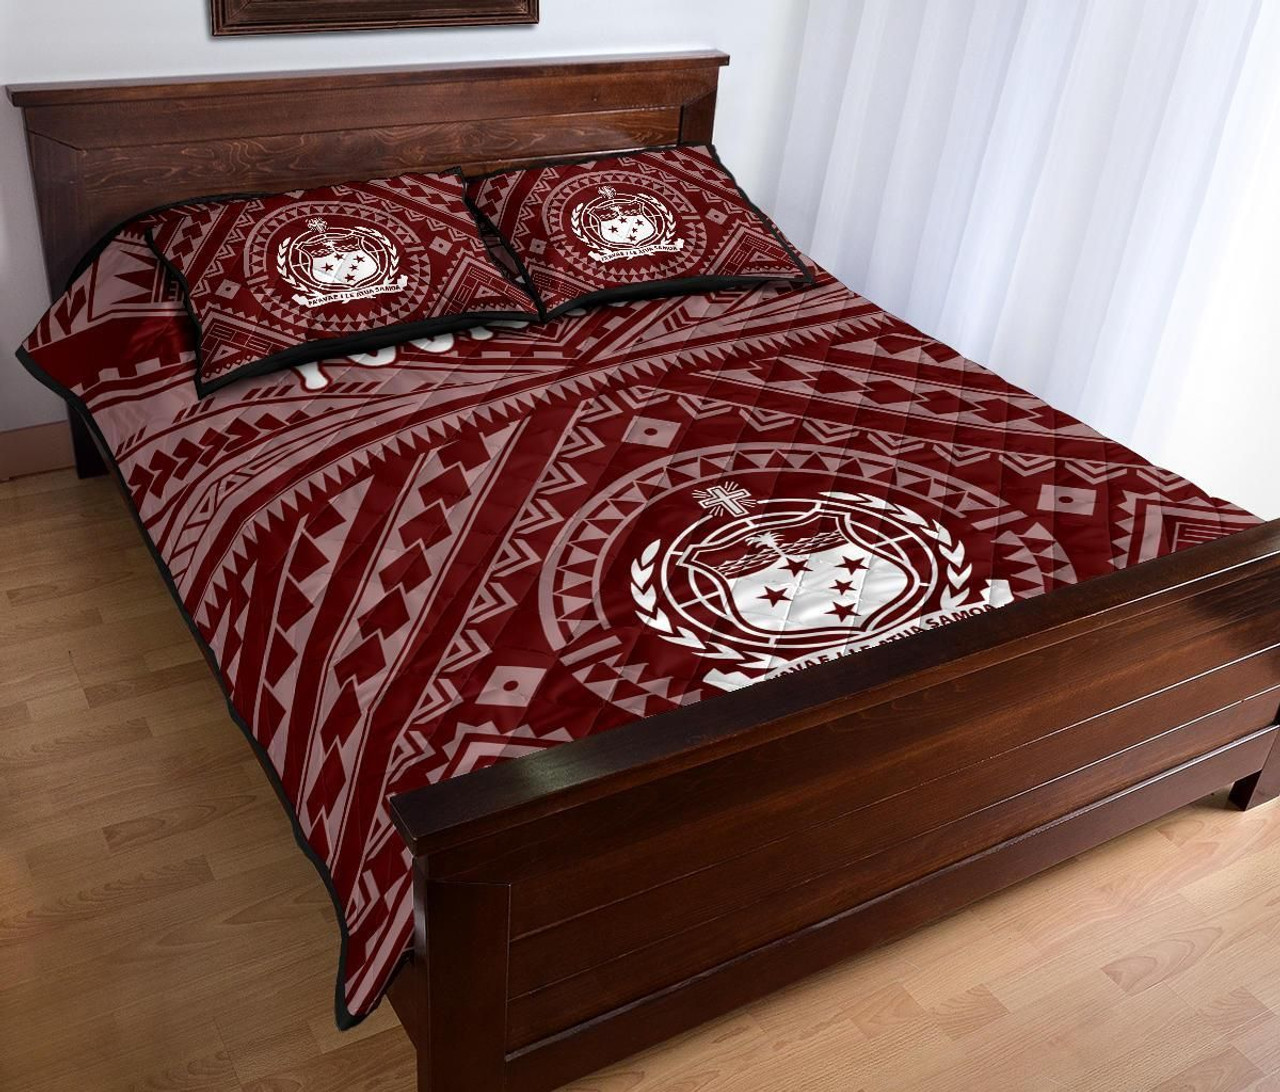 Samoa Personalised Quilt Bed Set - Samoa Seal In Polynesian Tattoo Style (Red) 3